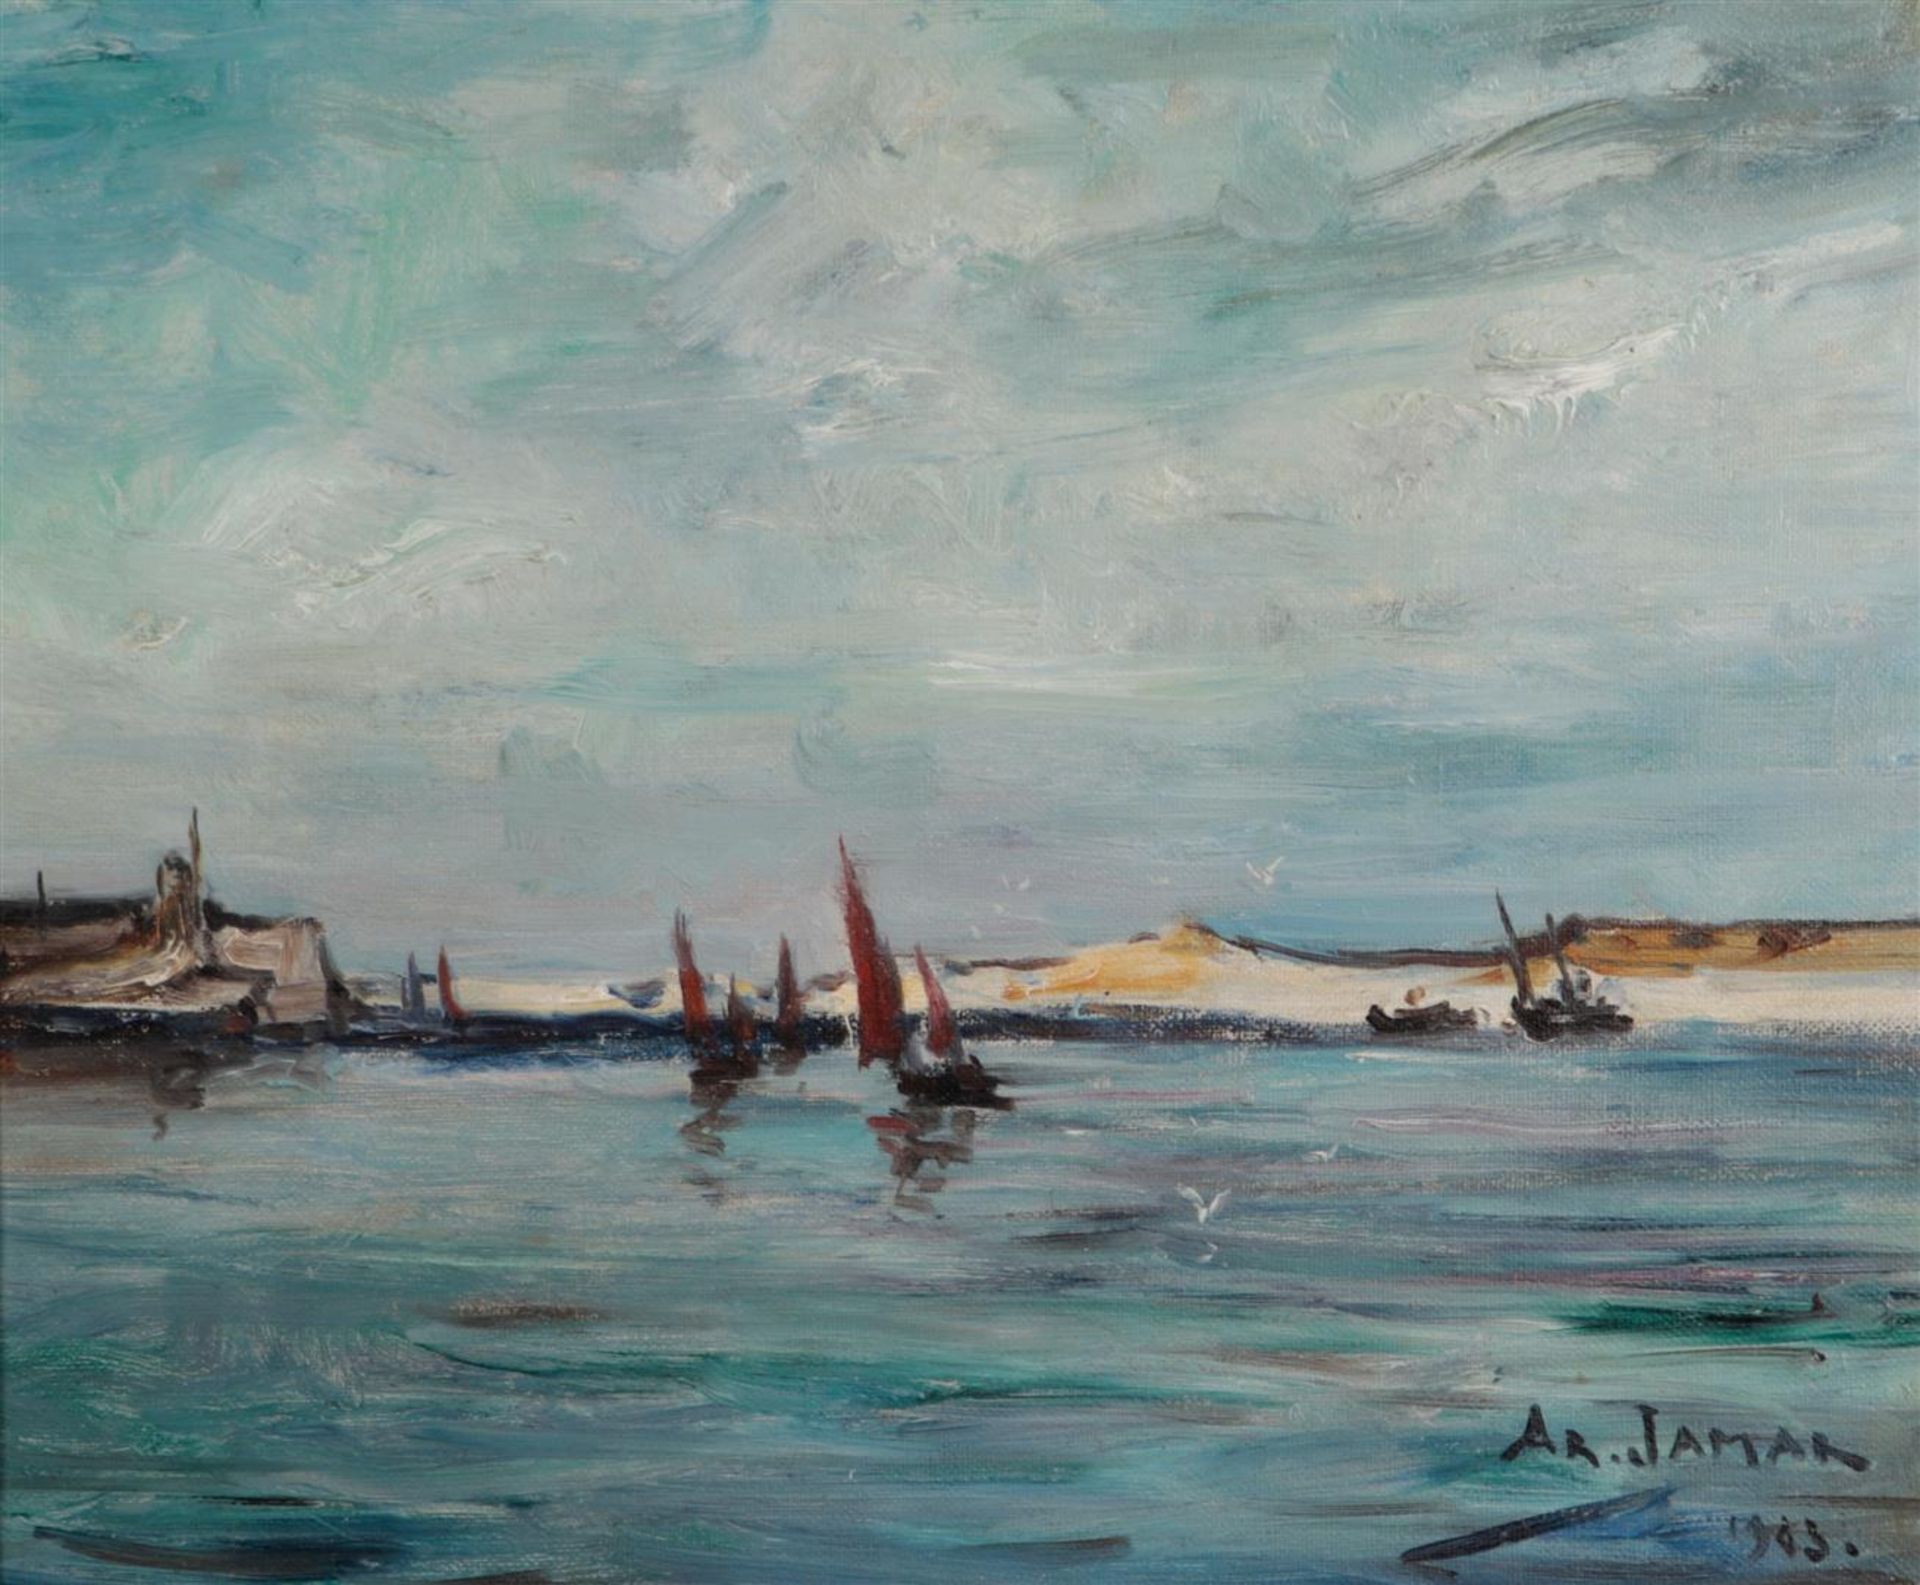 ArmandG. Jamar(1870-1946), Fishing ships off the coast, signed and dated '43' (bottom right), oil on